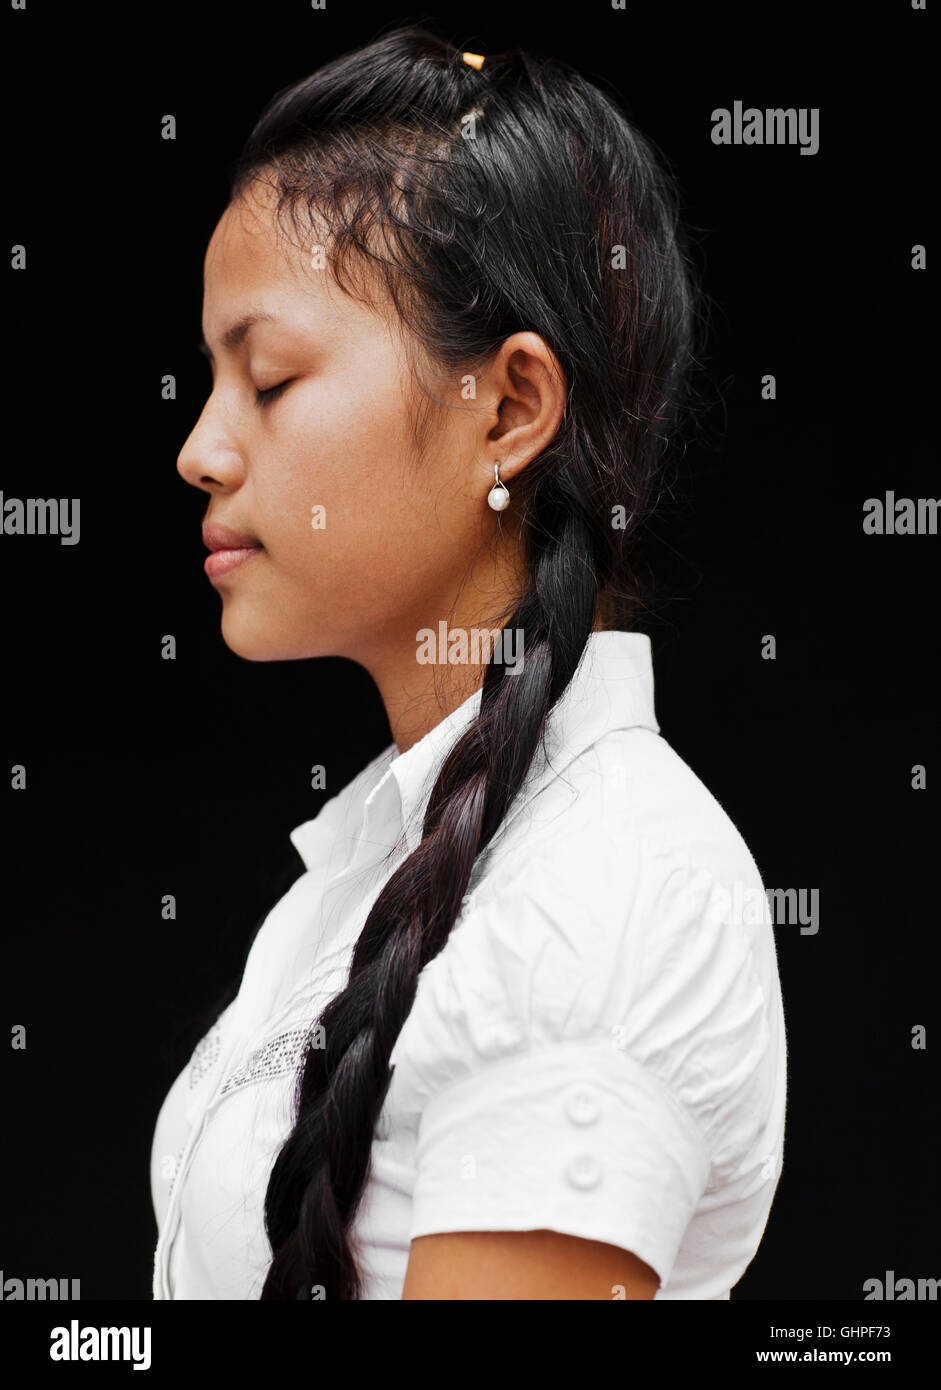 Portrait of Smot singer Srey Pov. Srey is a student and performer with Cambodia Living Arts in Phnom Pehn, Cambodia. Stock Photo